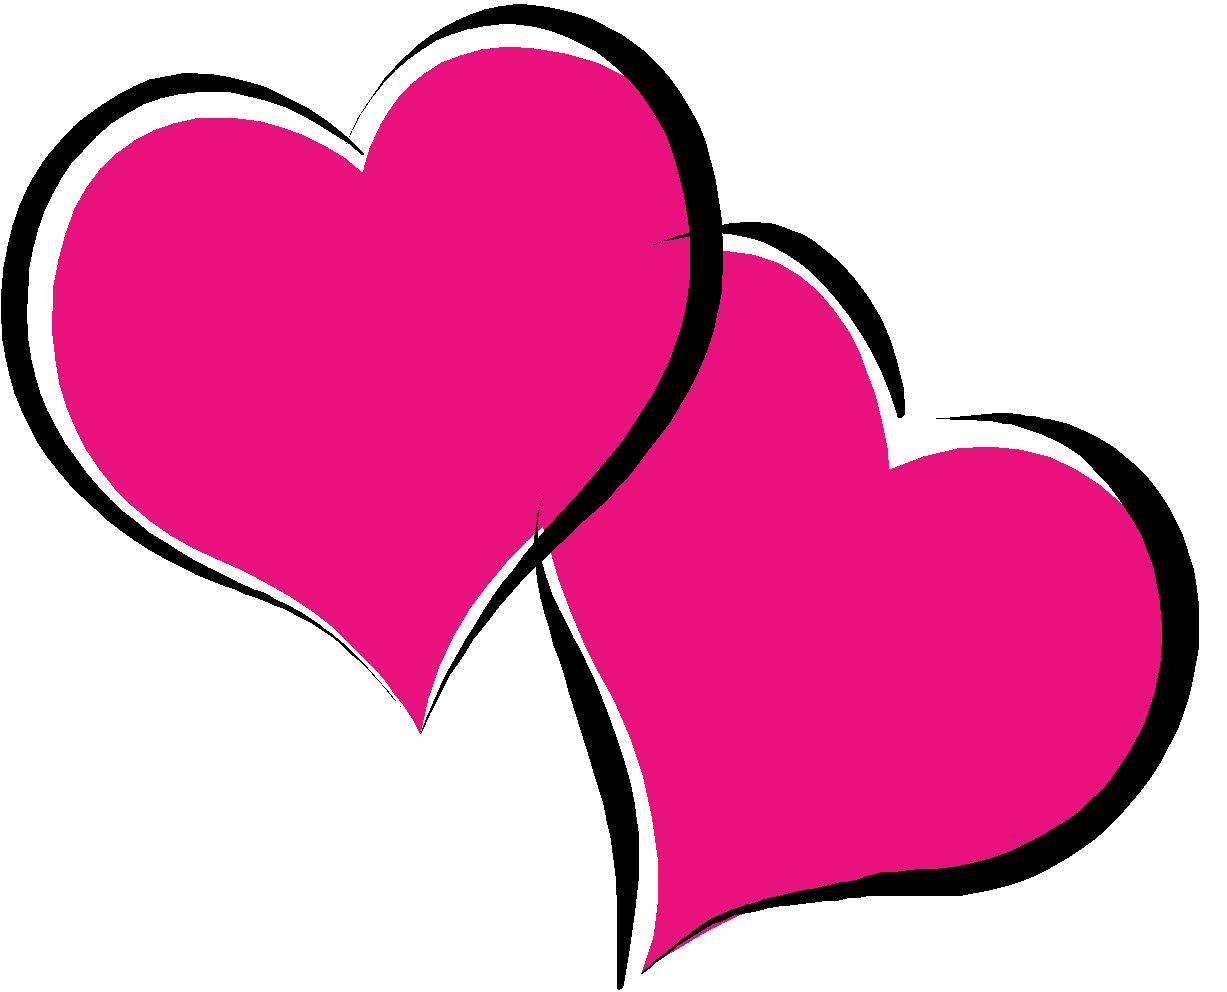 Hearts Clip Art Border | Clipart library - Free Clipart Images